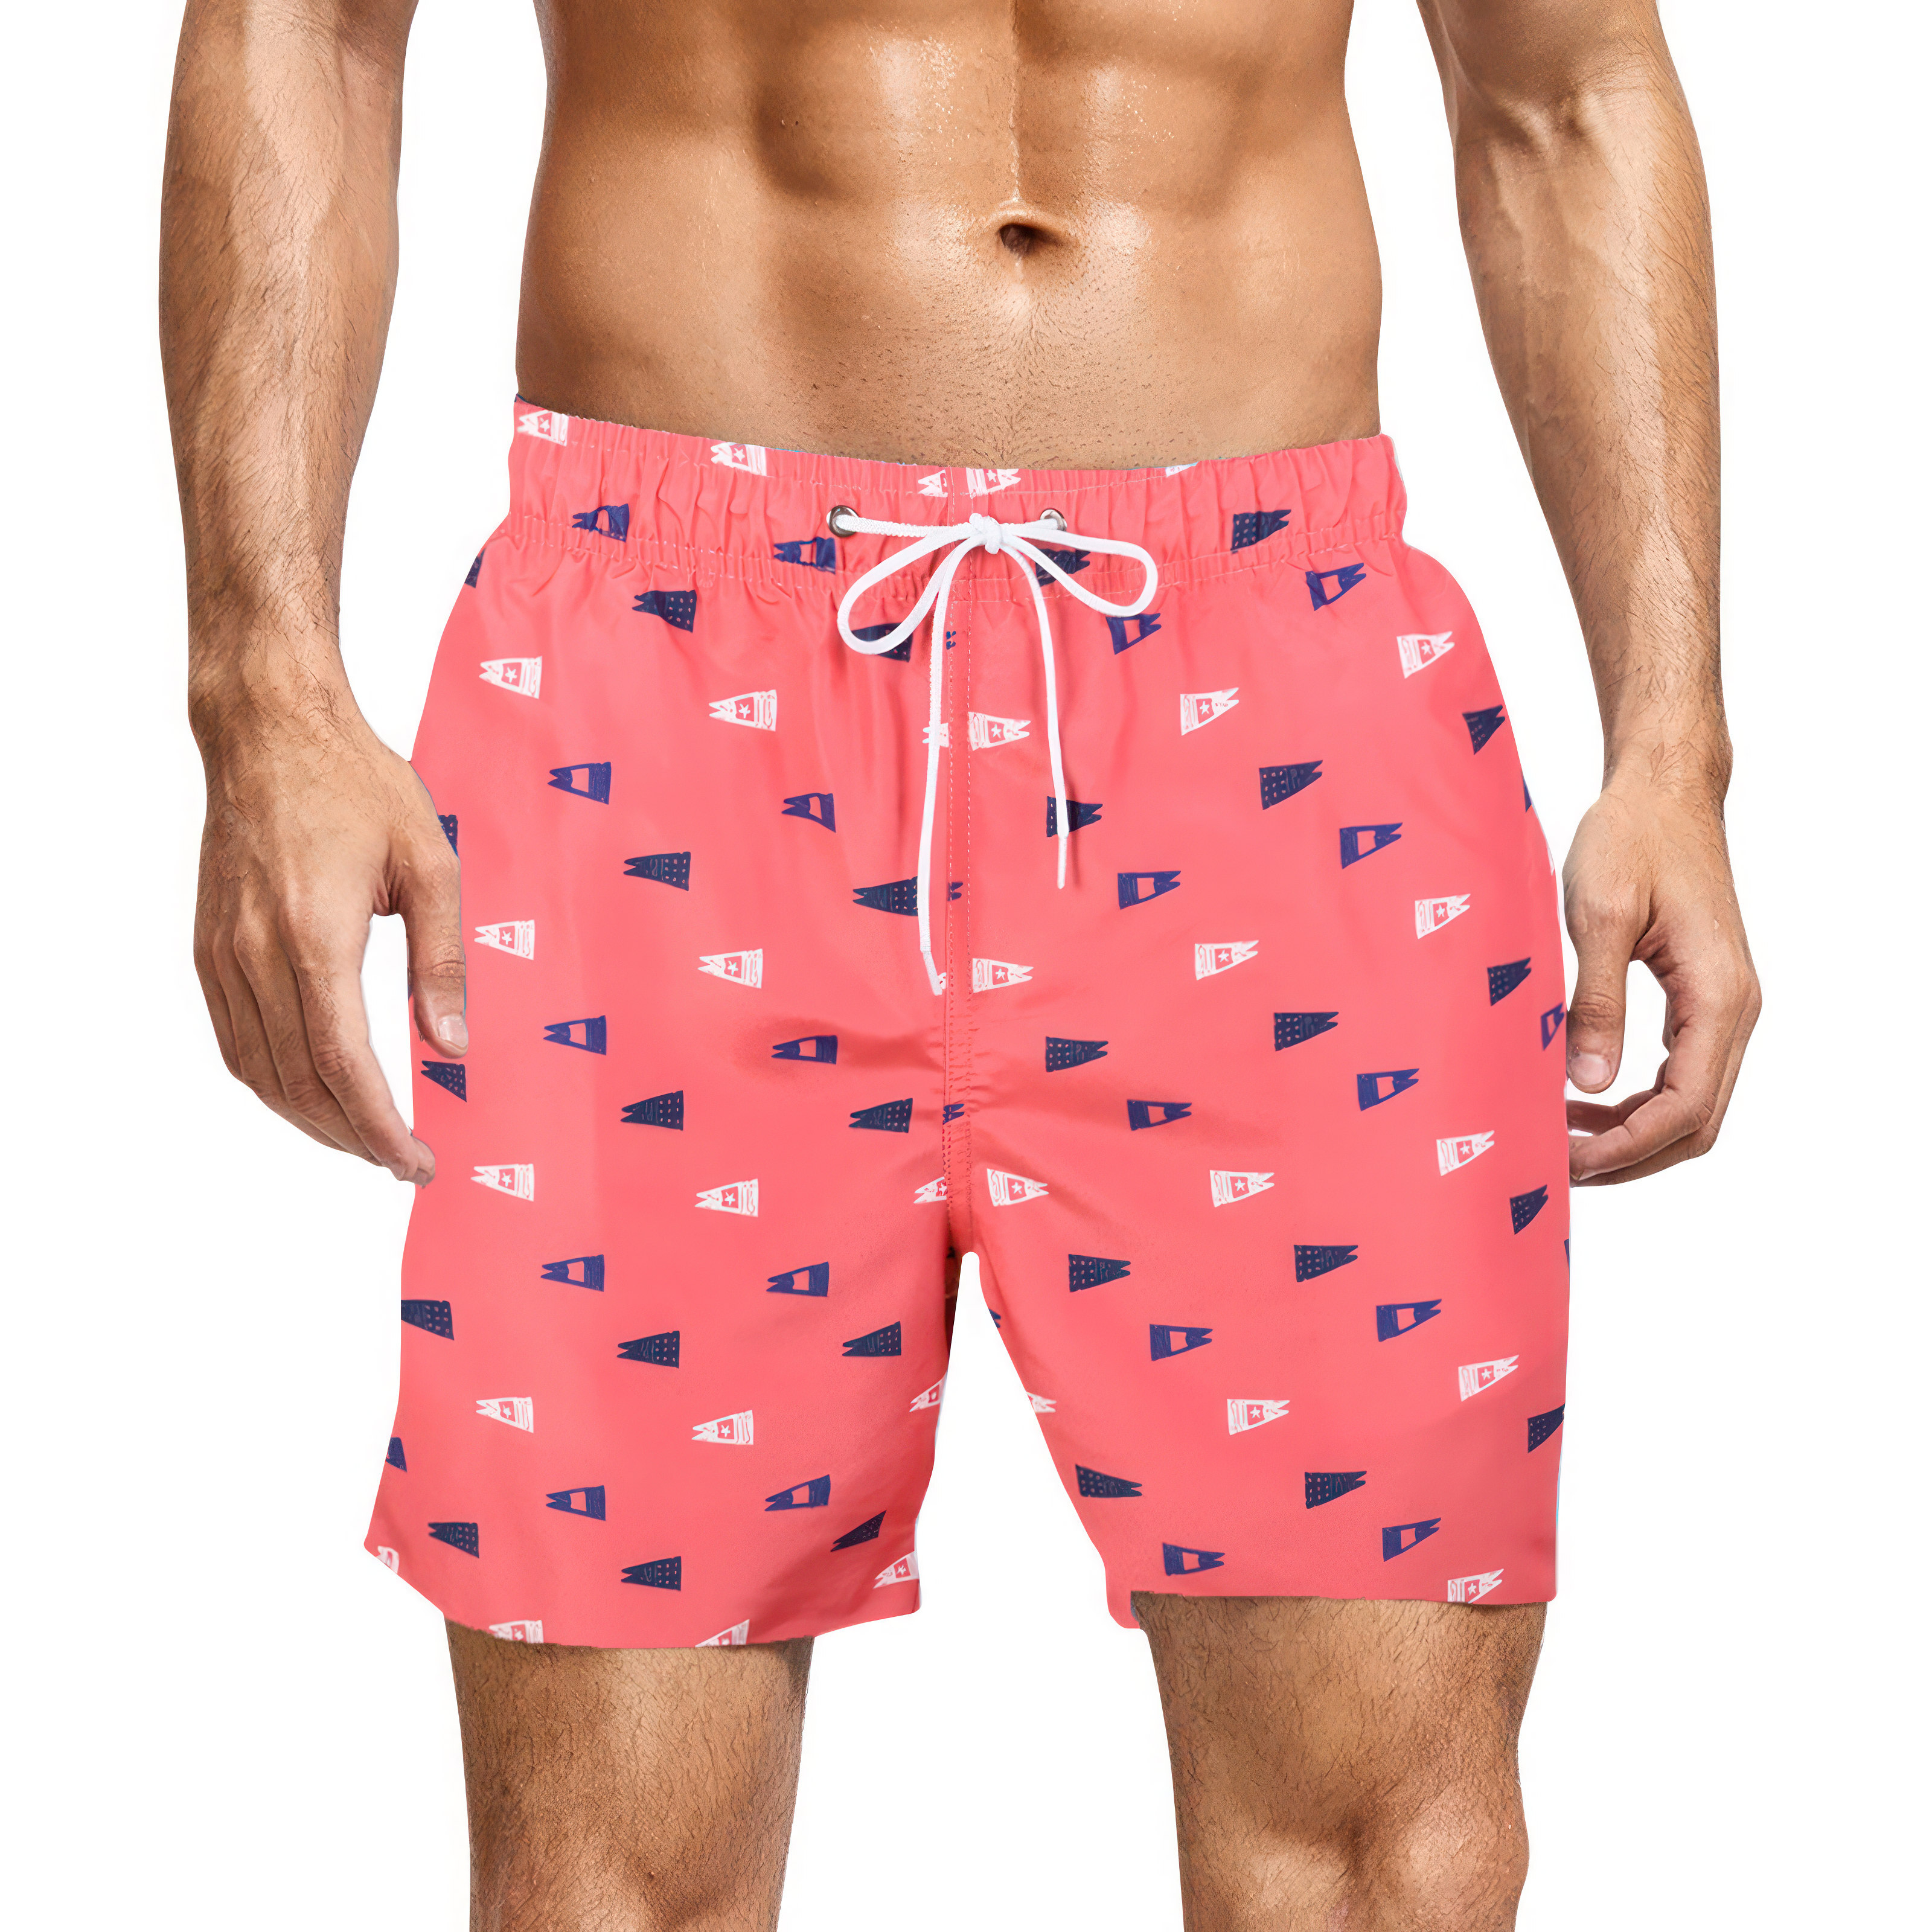 3-Pack Men's Printed Swim Shorts With Pockets Quick Dry Beachwear Bathing Suits Board Trunks - M